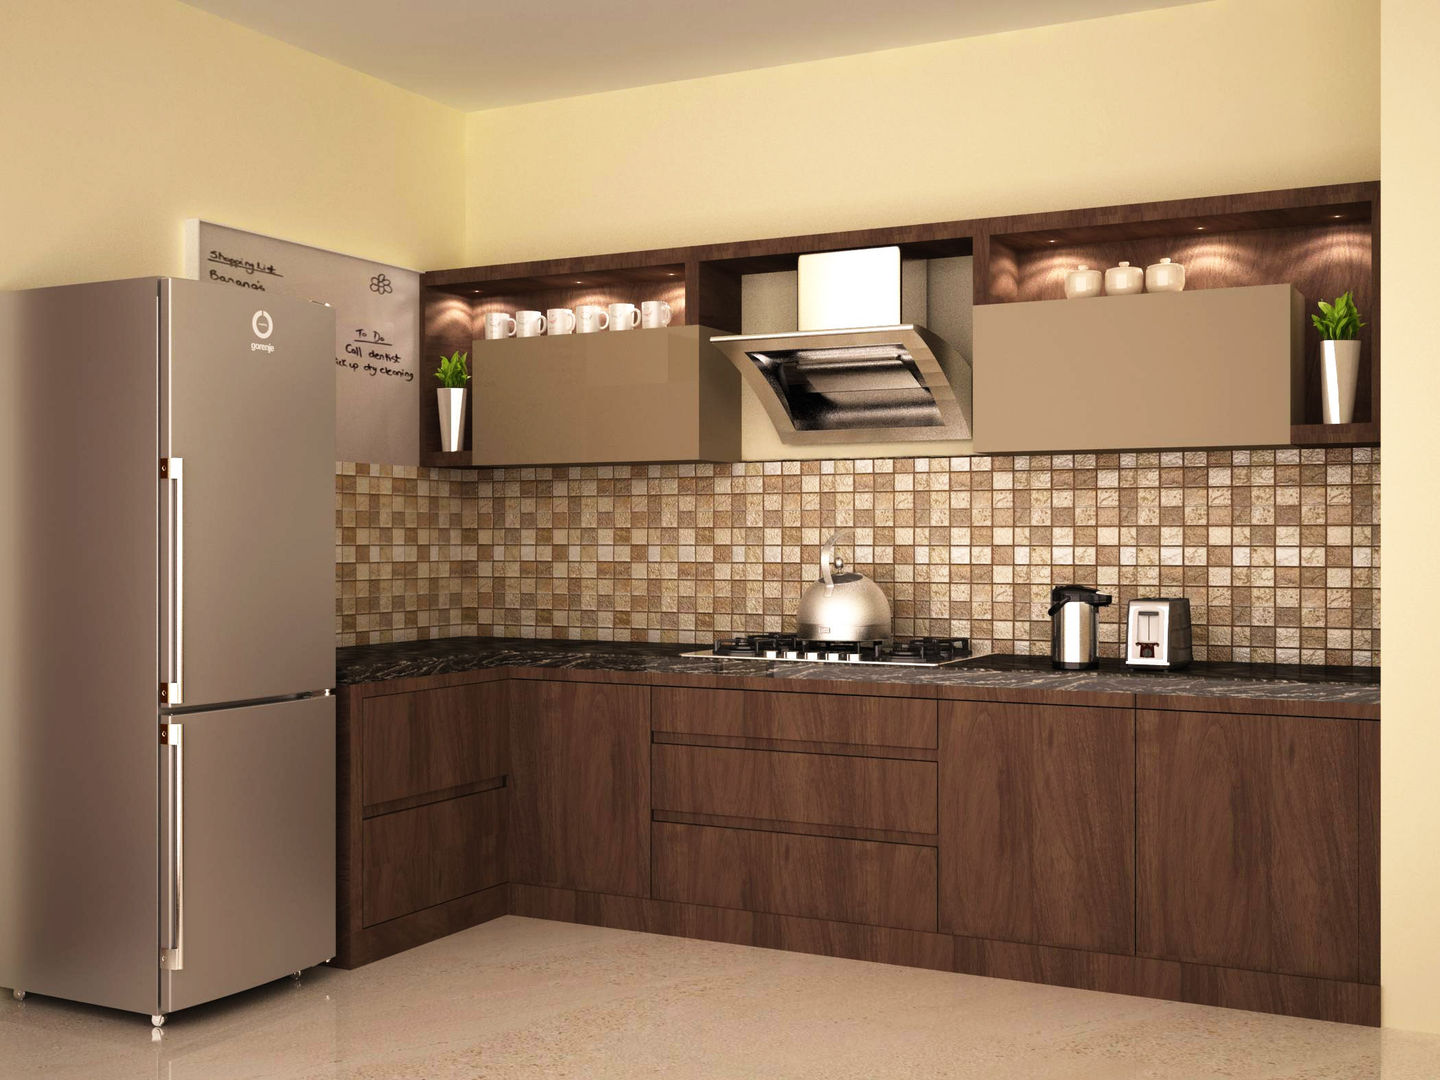 Dual colour style homify Modern kitchen